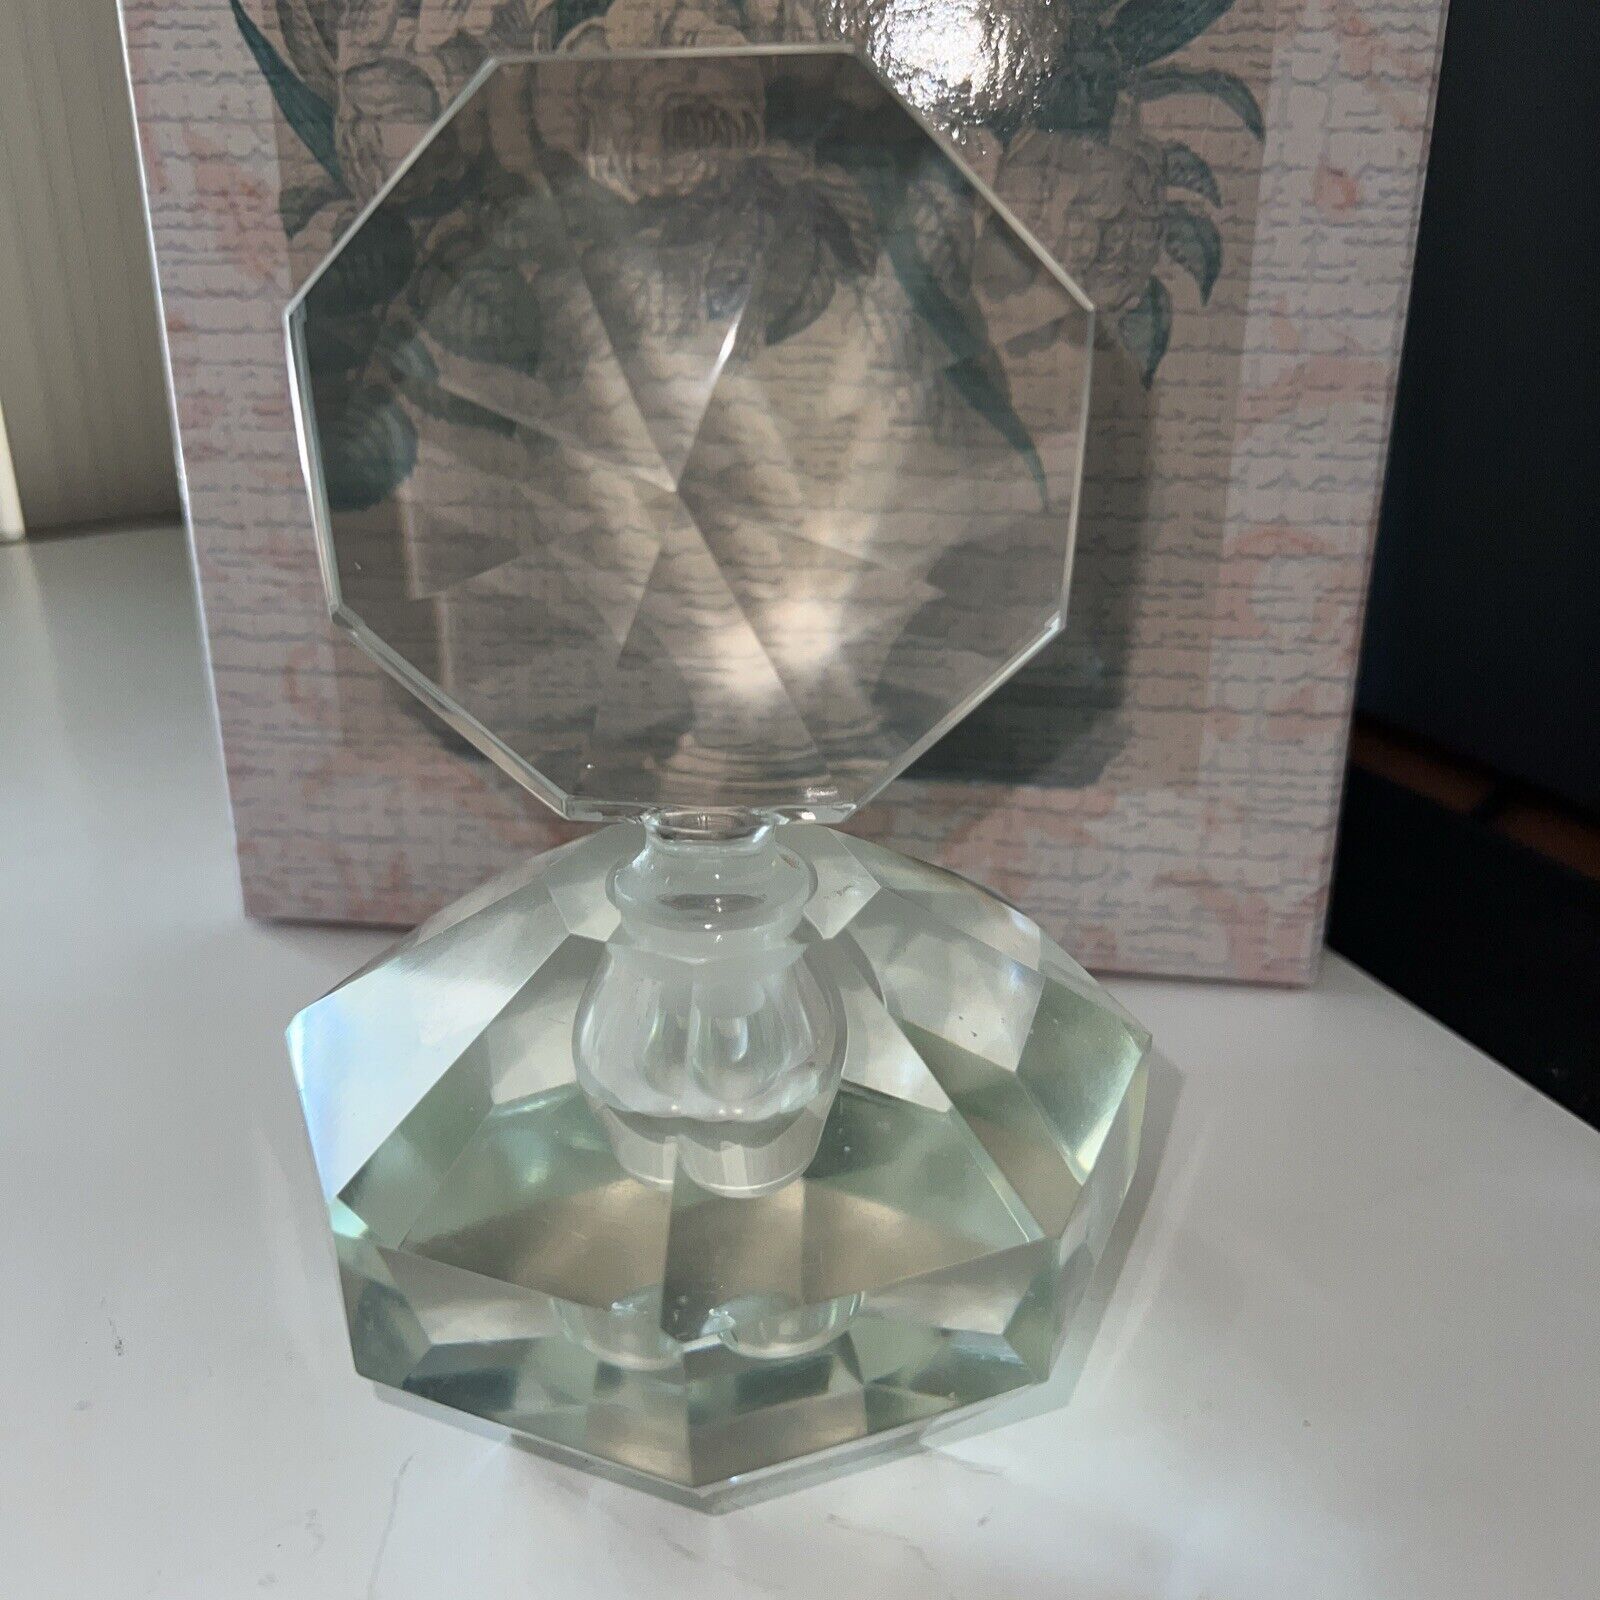 1950's Crystal Perfume Bottle Vanity Accessory Estate Find Tiffany Inspired